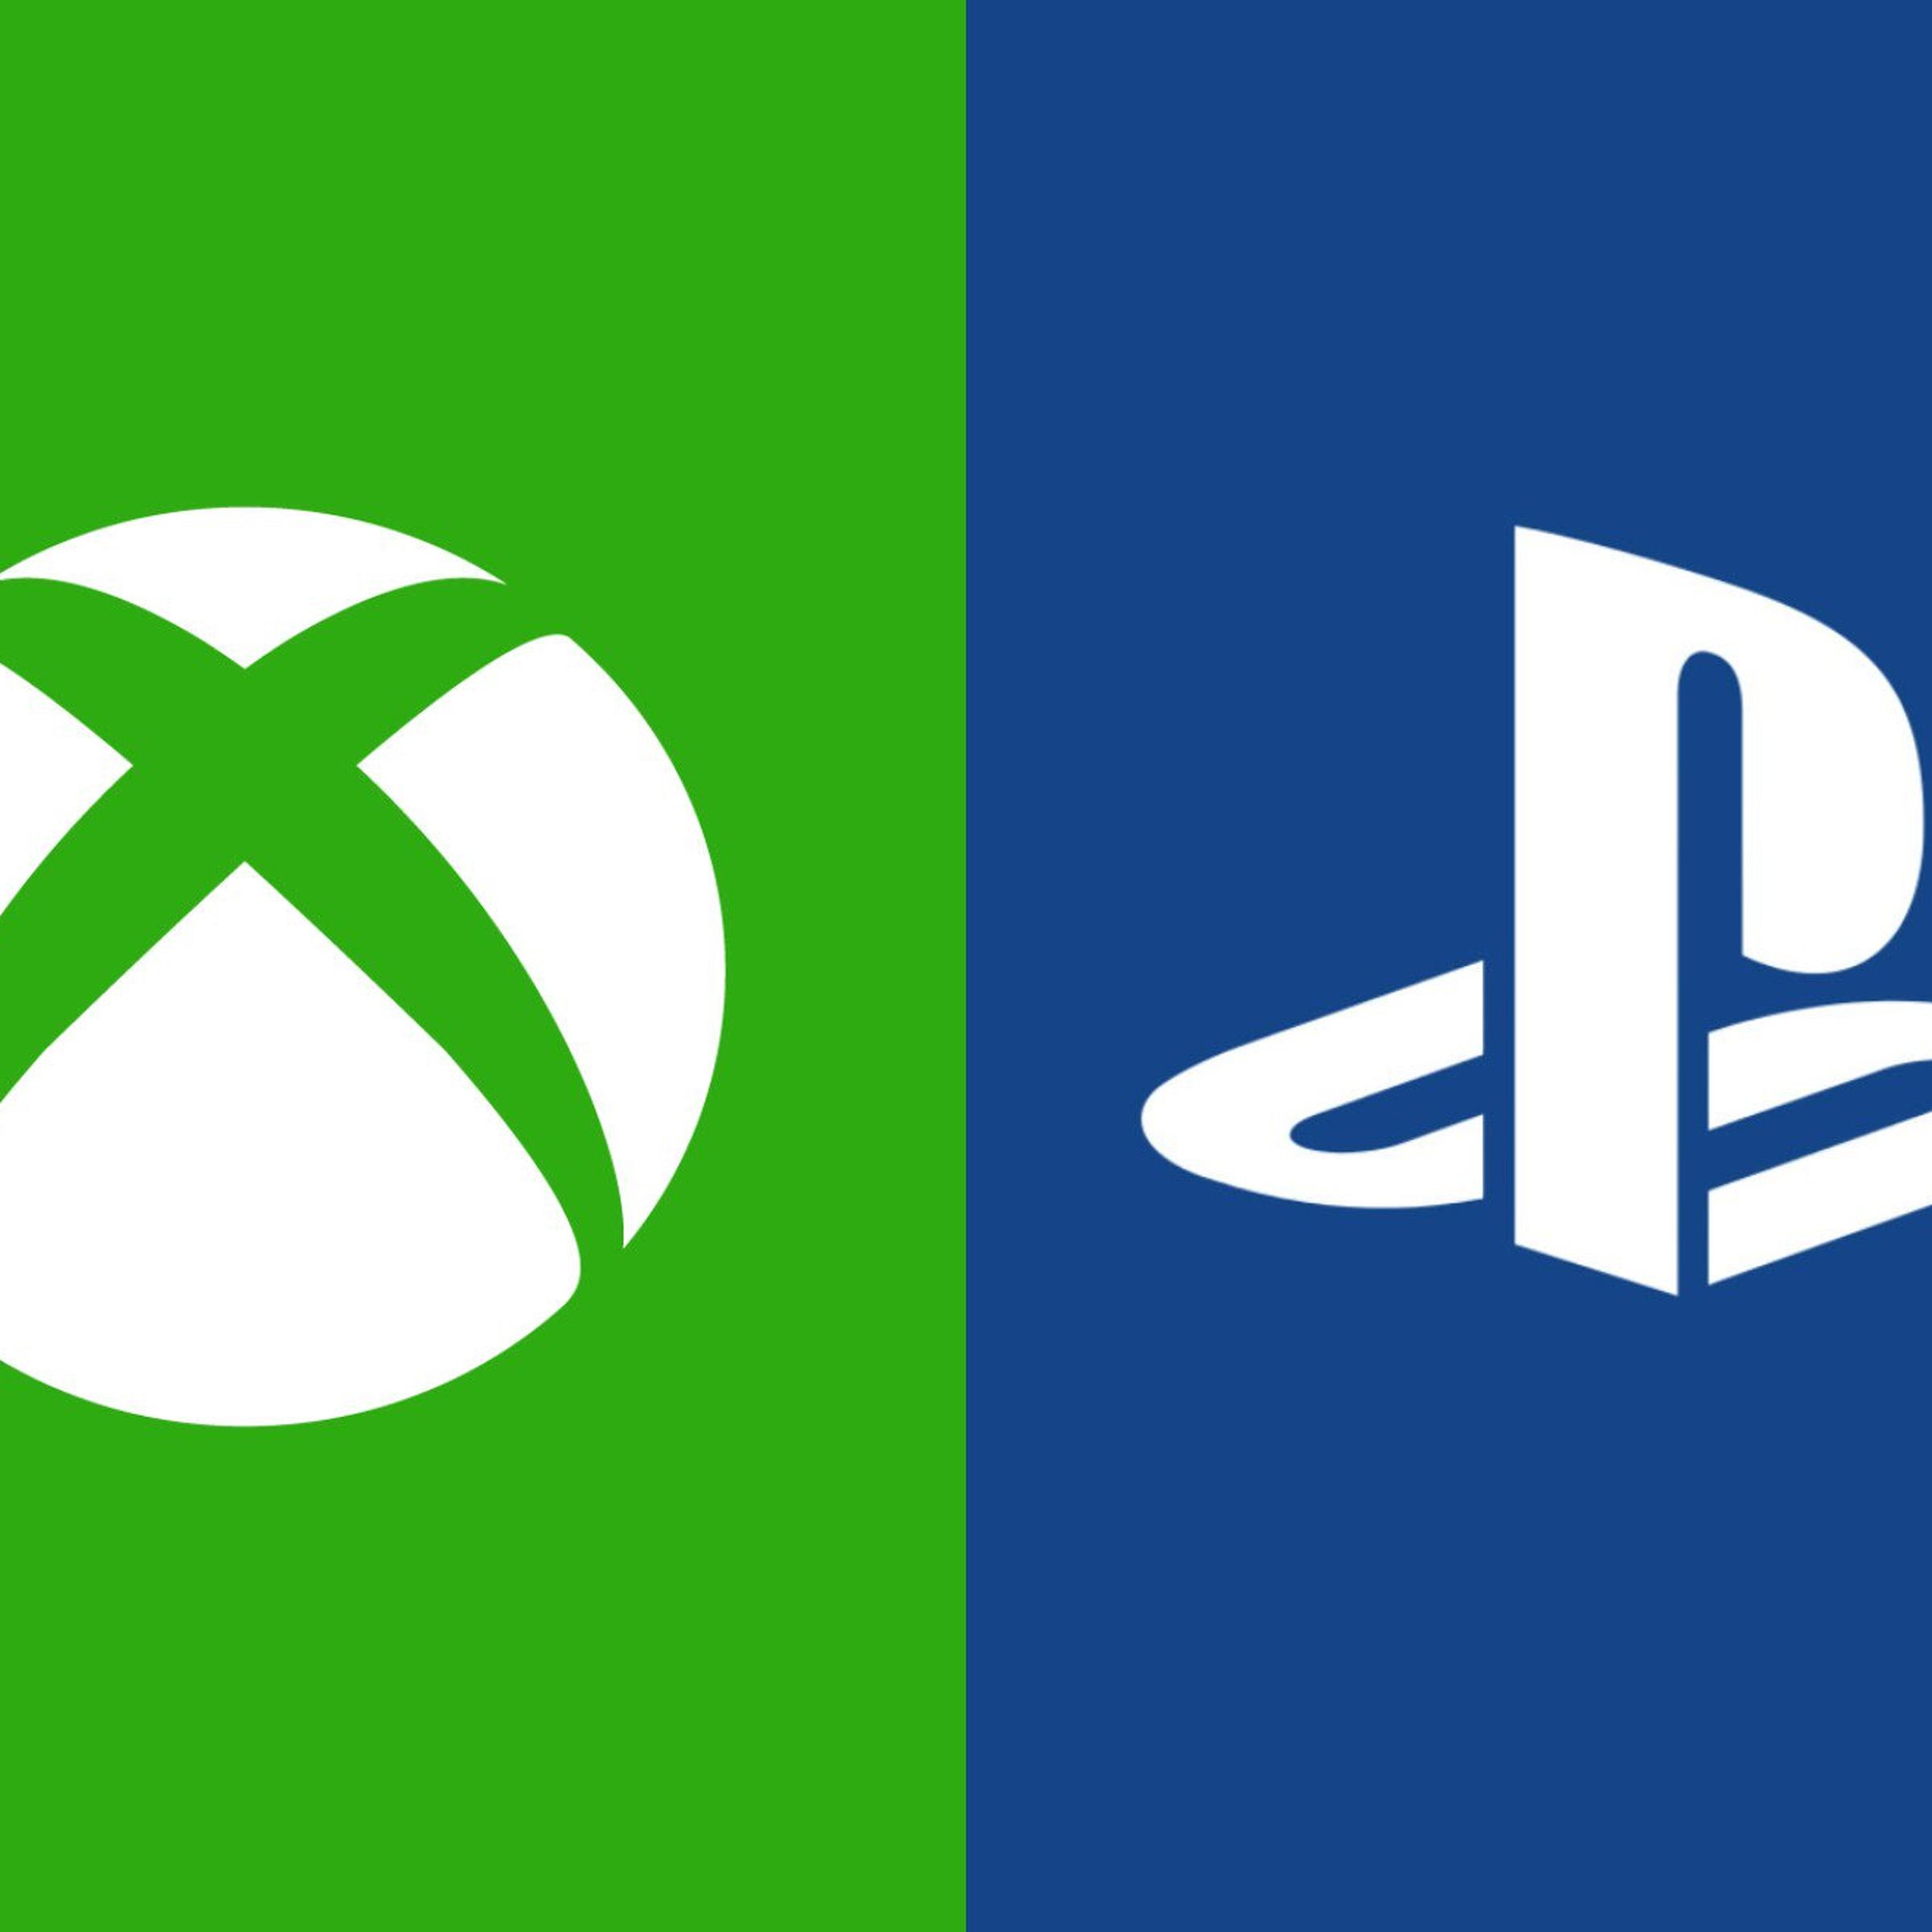 Illustration of Xbox and PlayStation logos